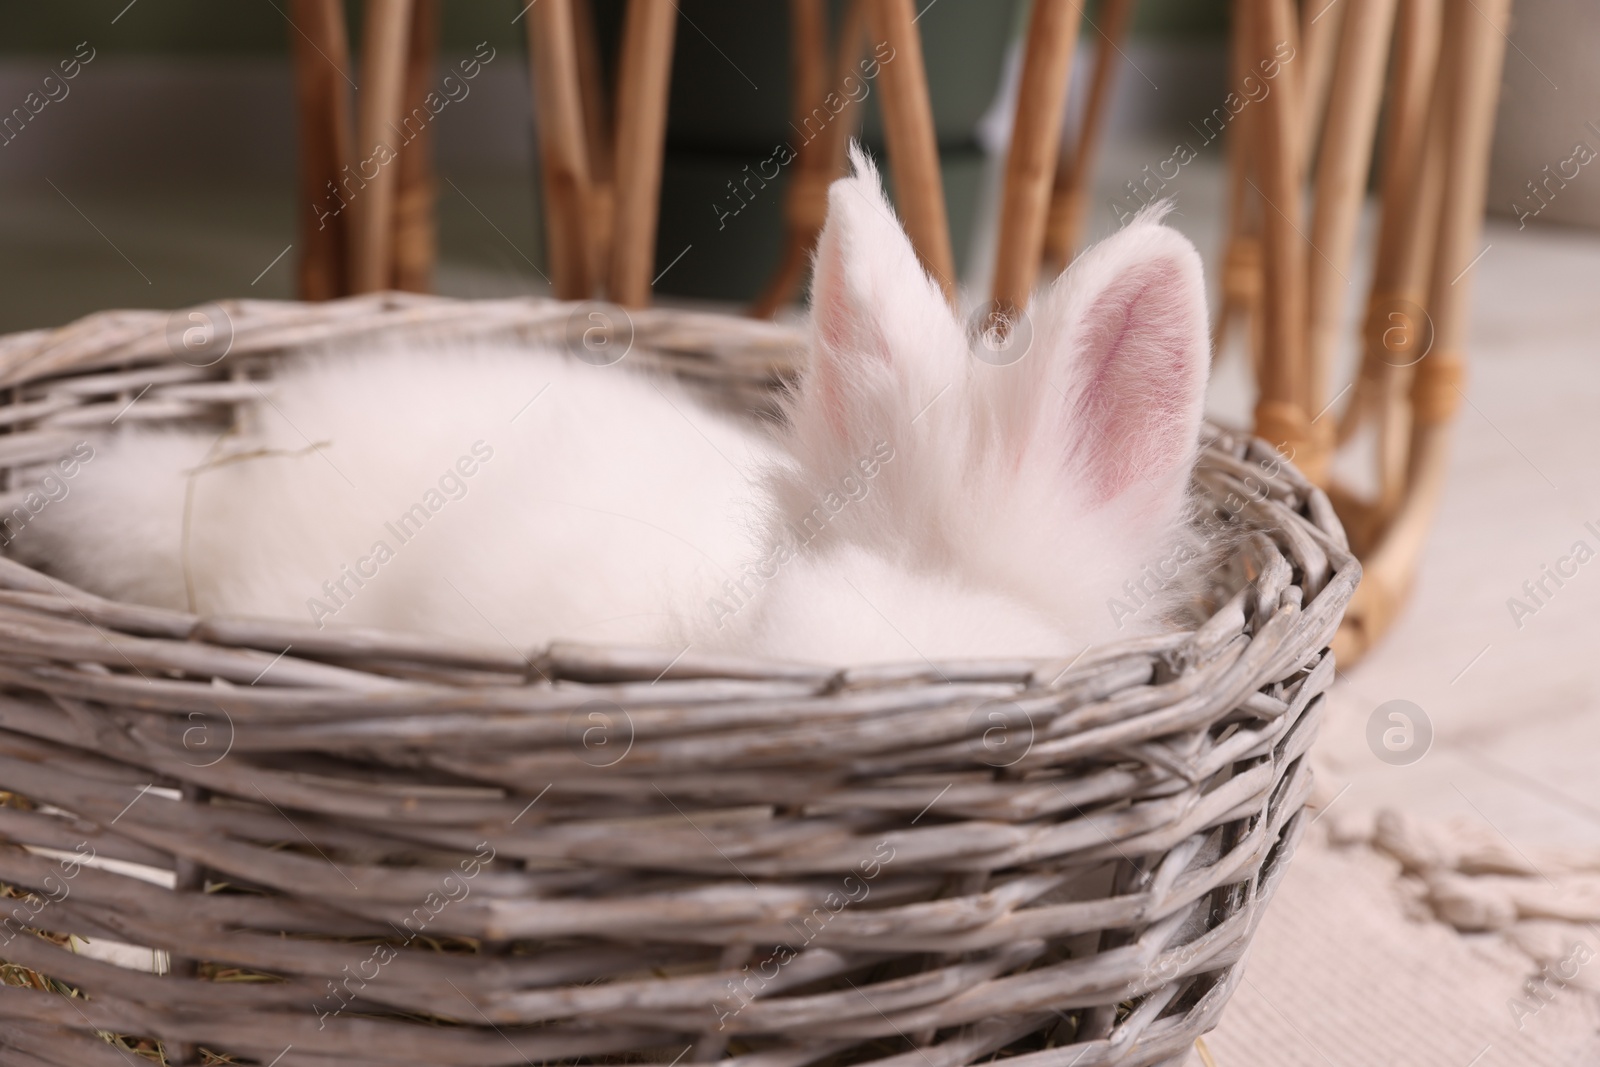 Photo of Fluffy white rabbit in wicker basket indoors. Cute pet